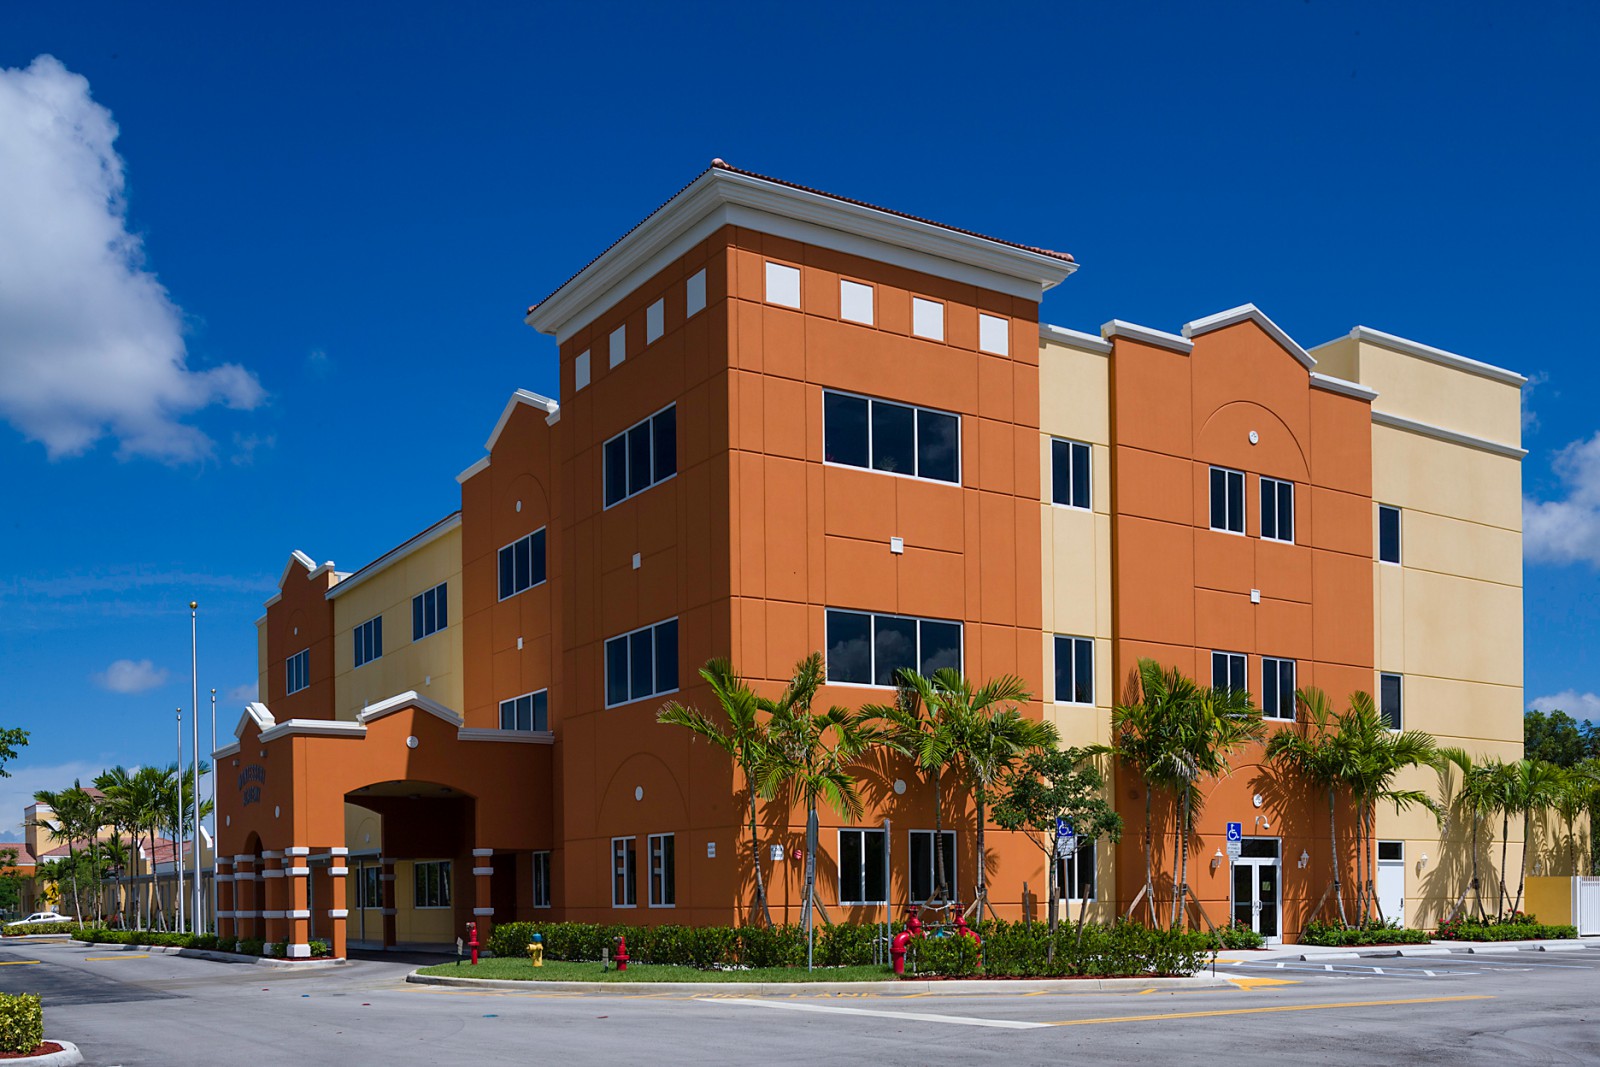 South East - Montessori Academy of Pembroke Pines